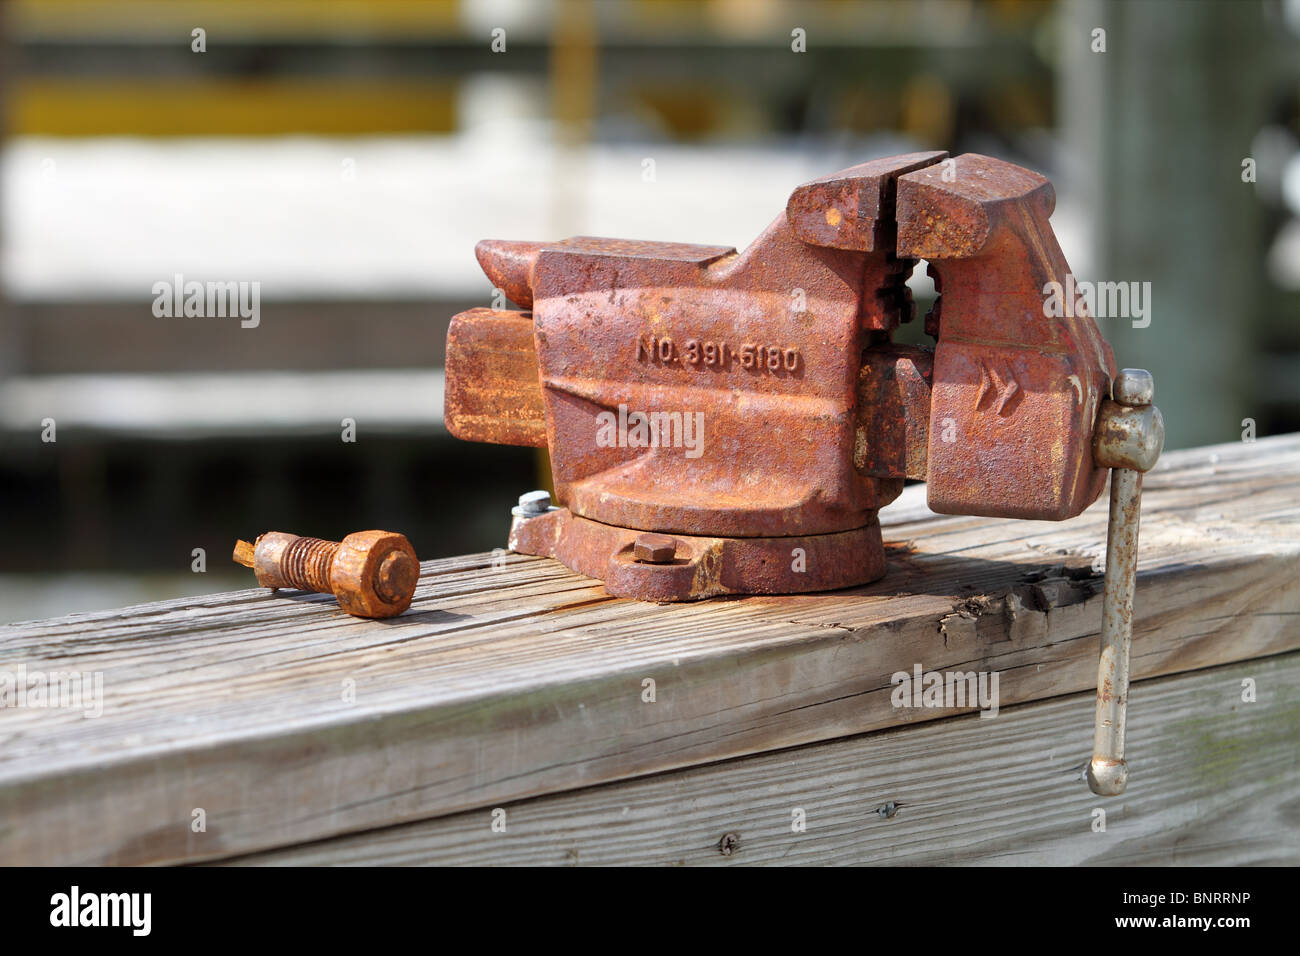 Old rusty bench vise Stock Photo